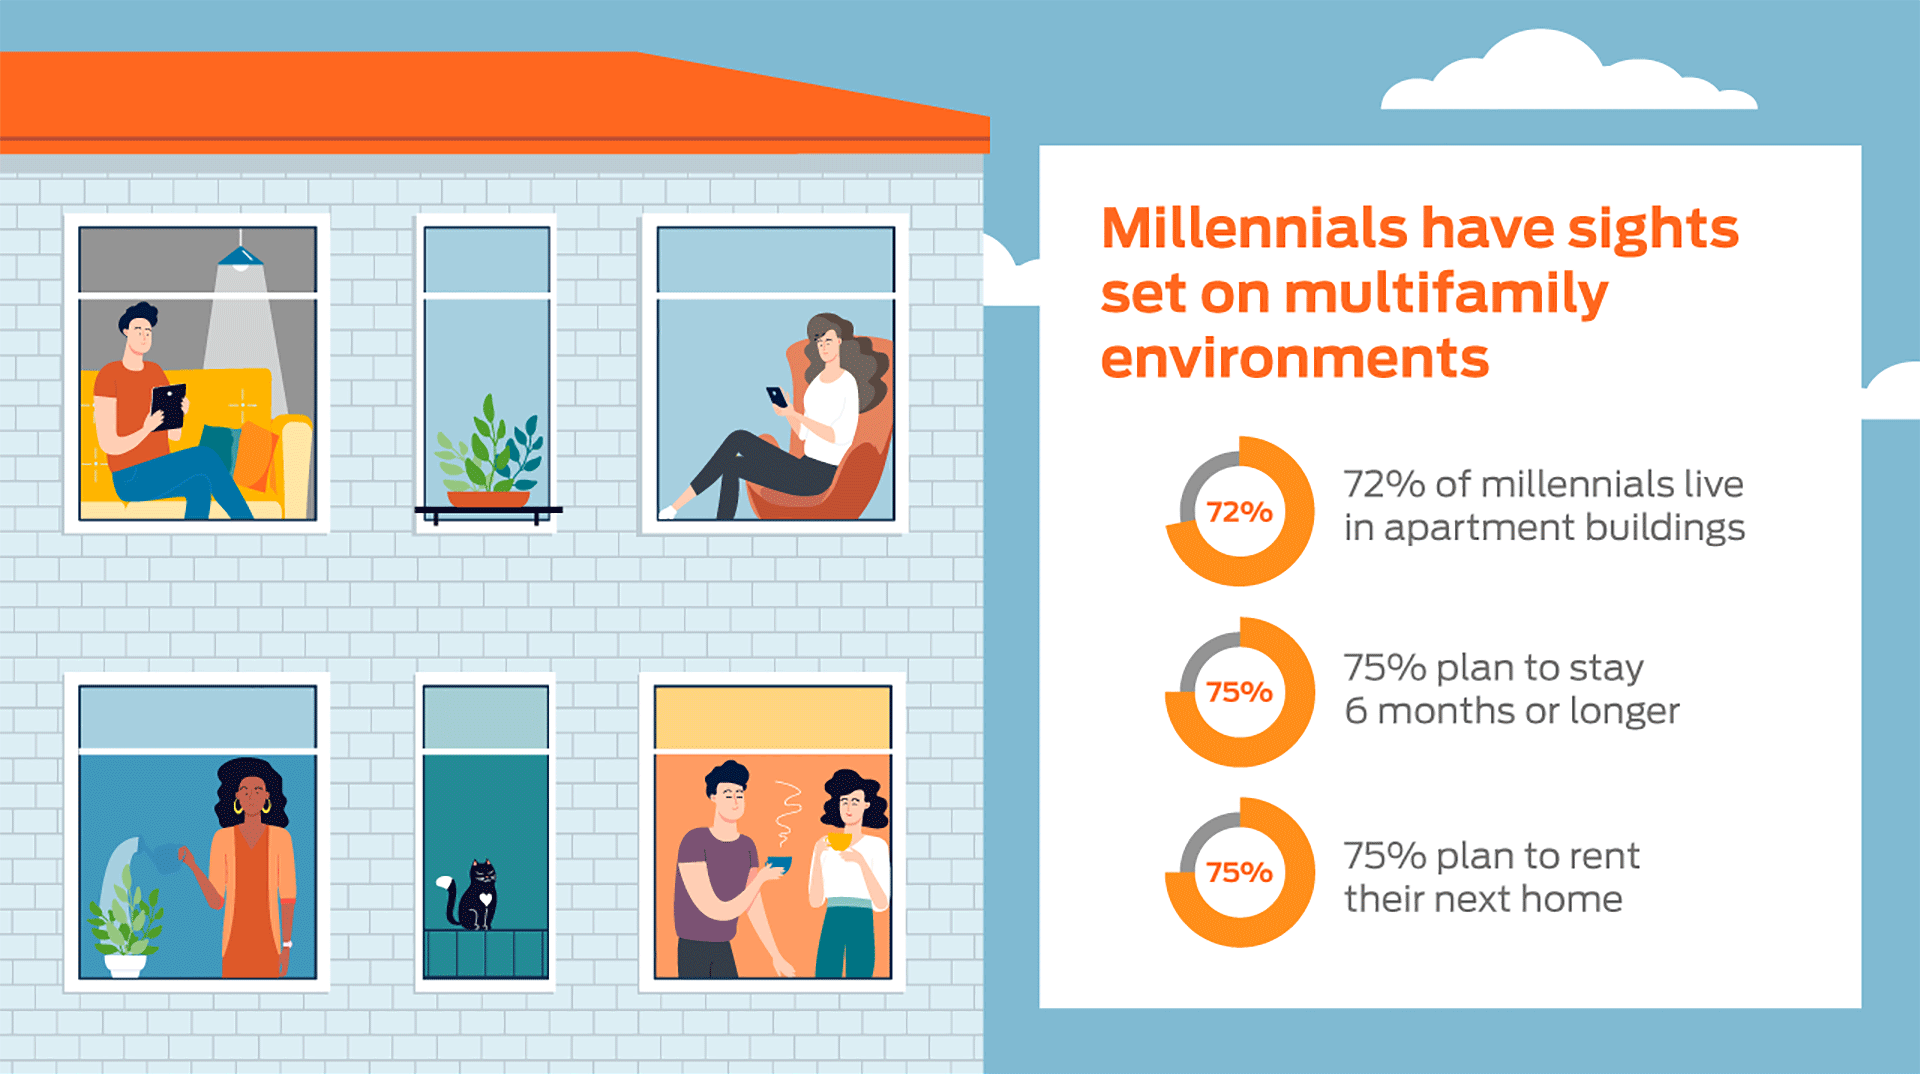 Millennials have sights set on multifamily environments